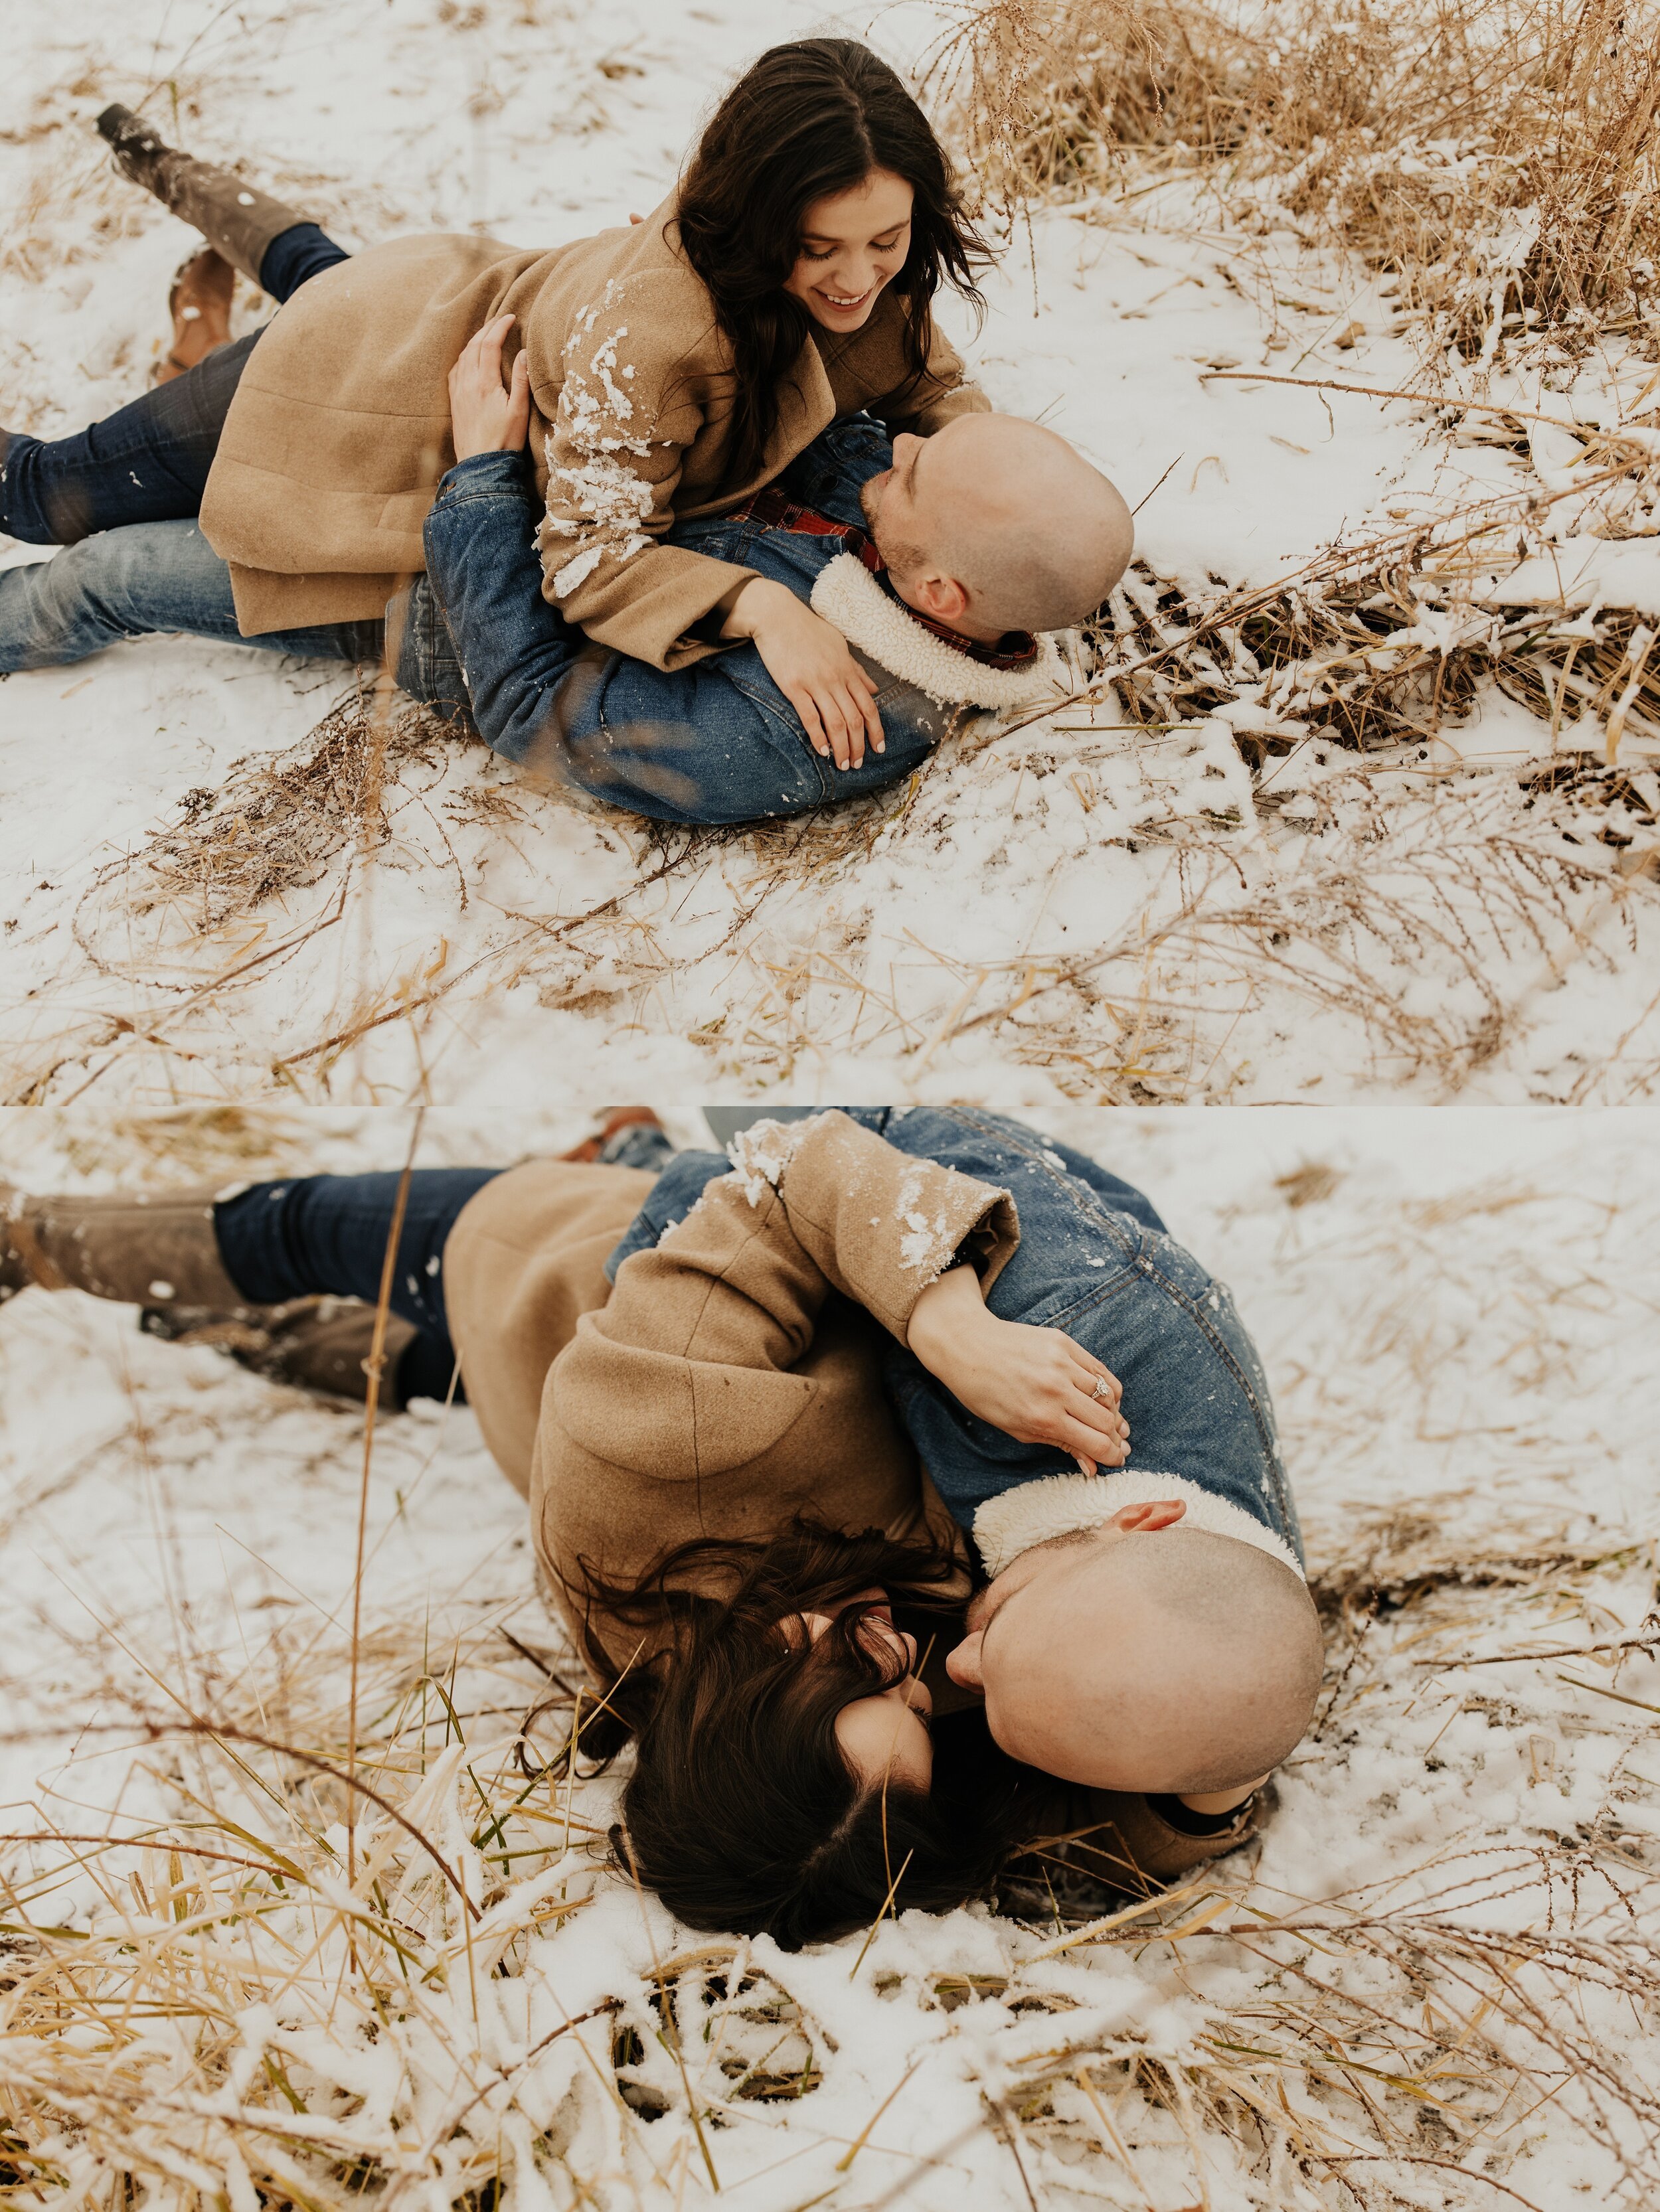 jessika-christine-photography-outdoor-engagement-couples-snow-adventurous-session (19).jpg